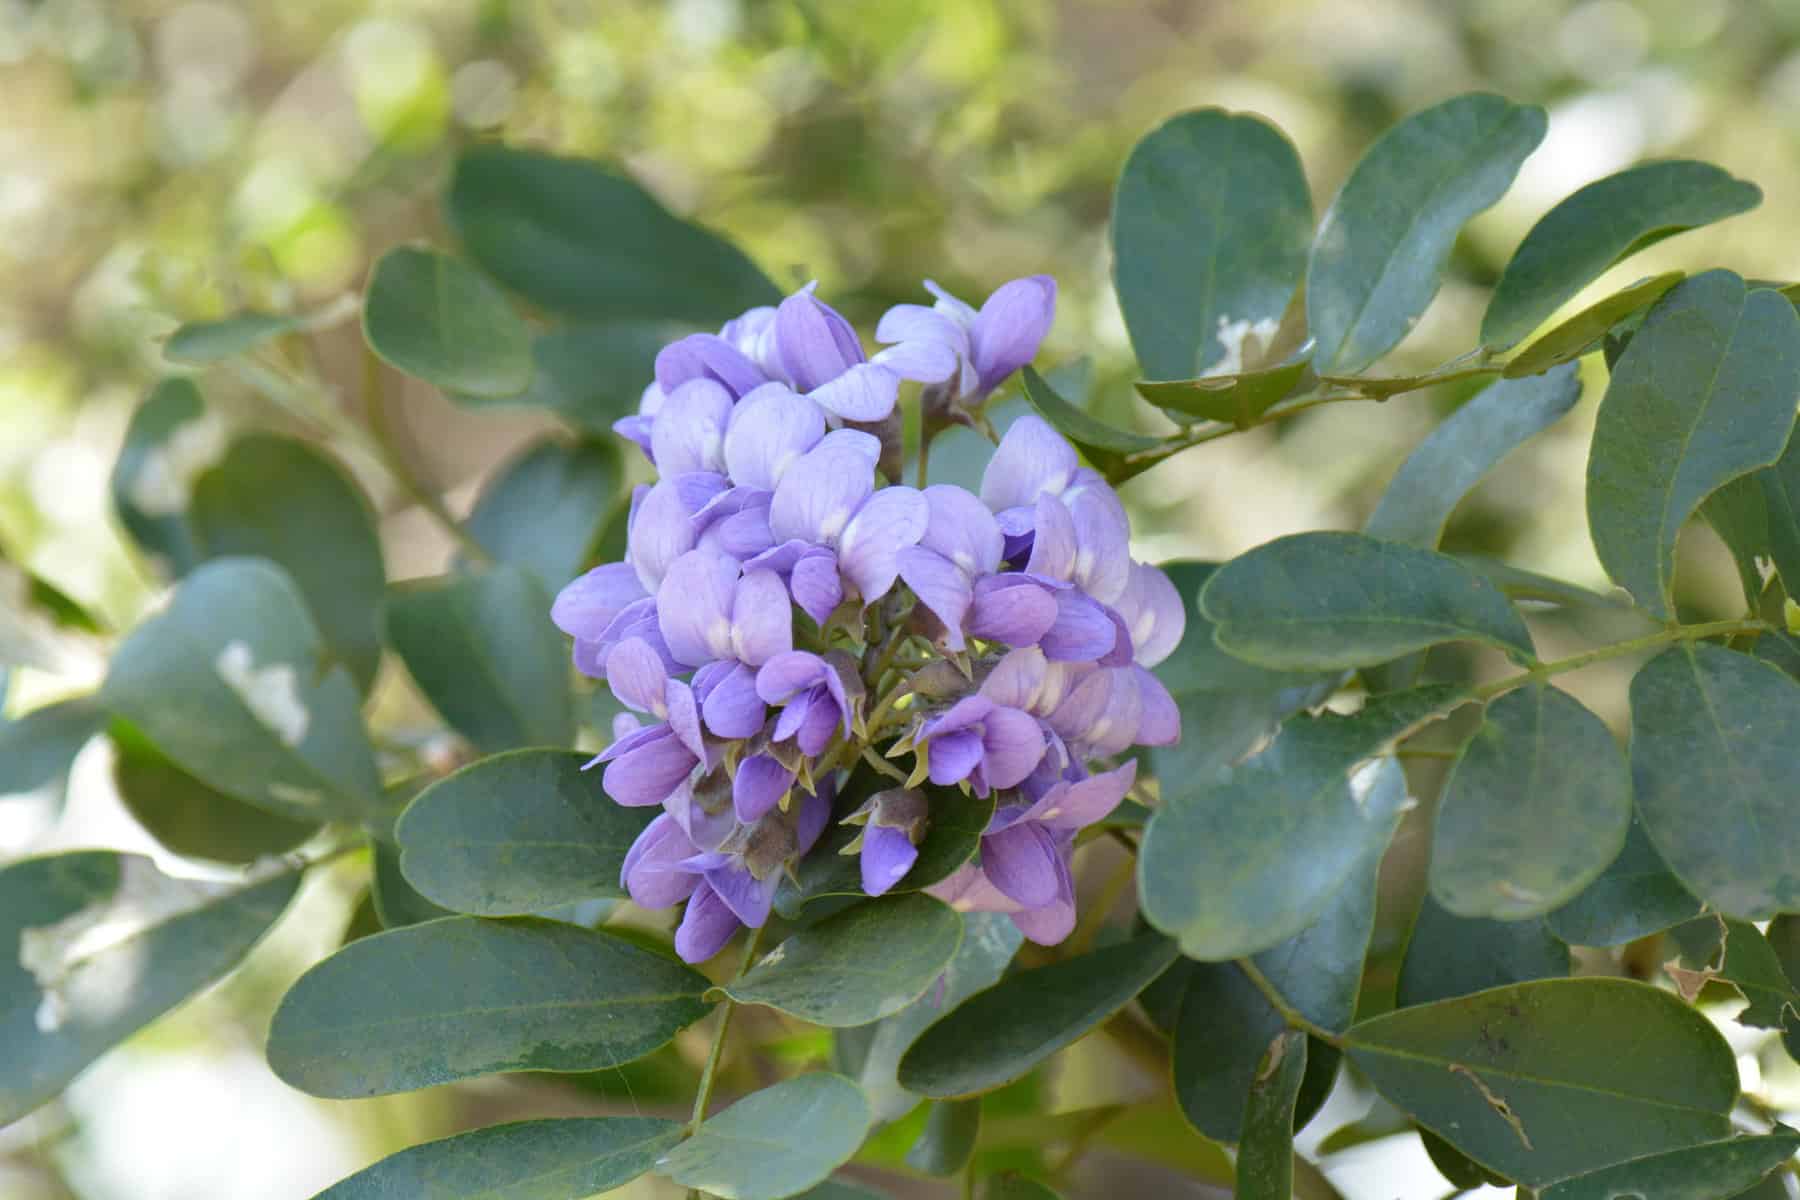 A purple flower on a plant with green leaves. texas mountain laurel